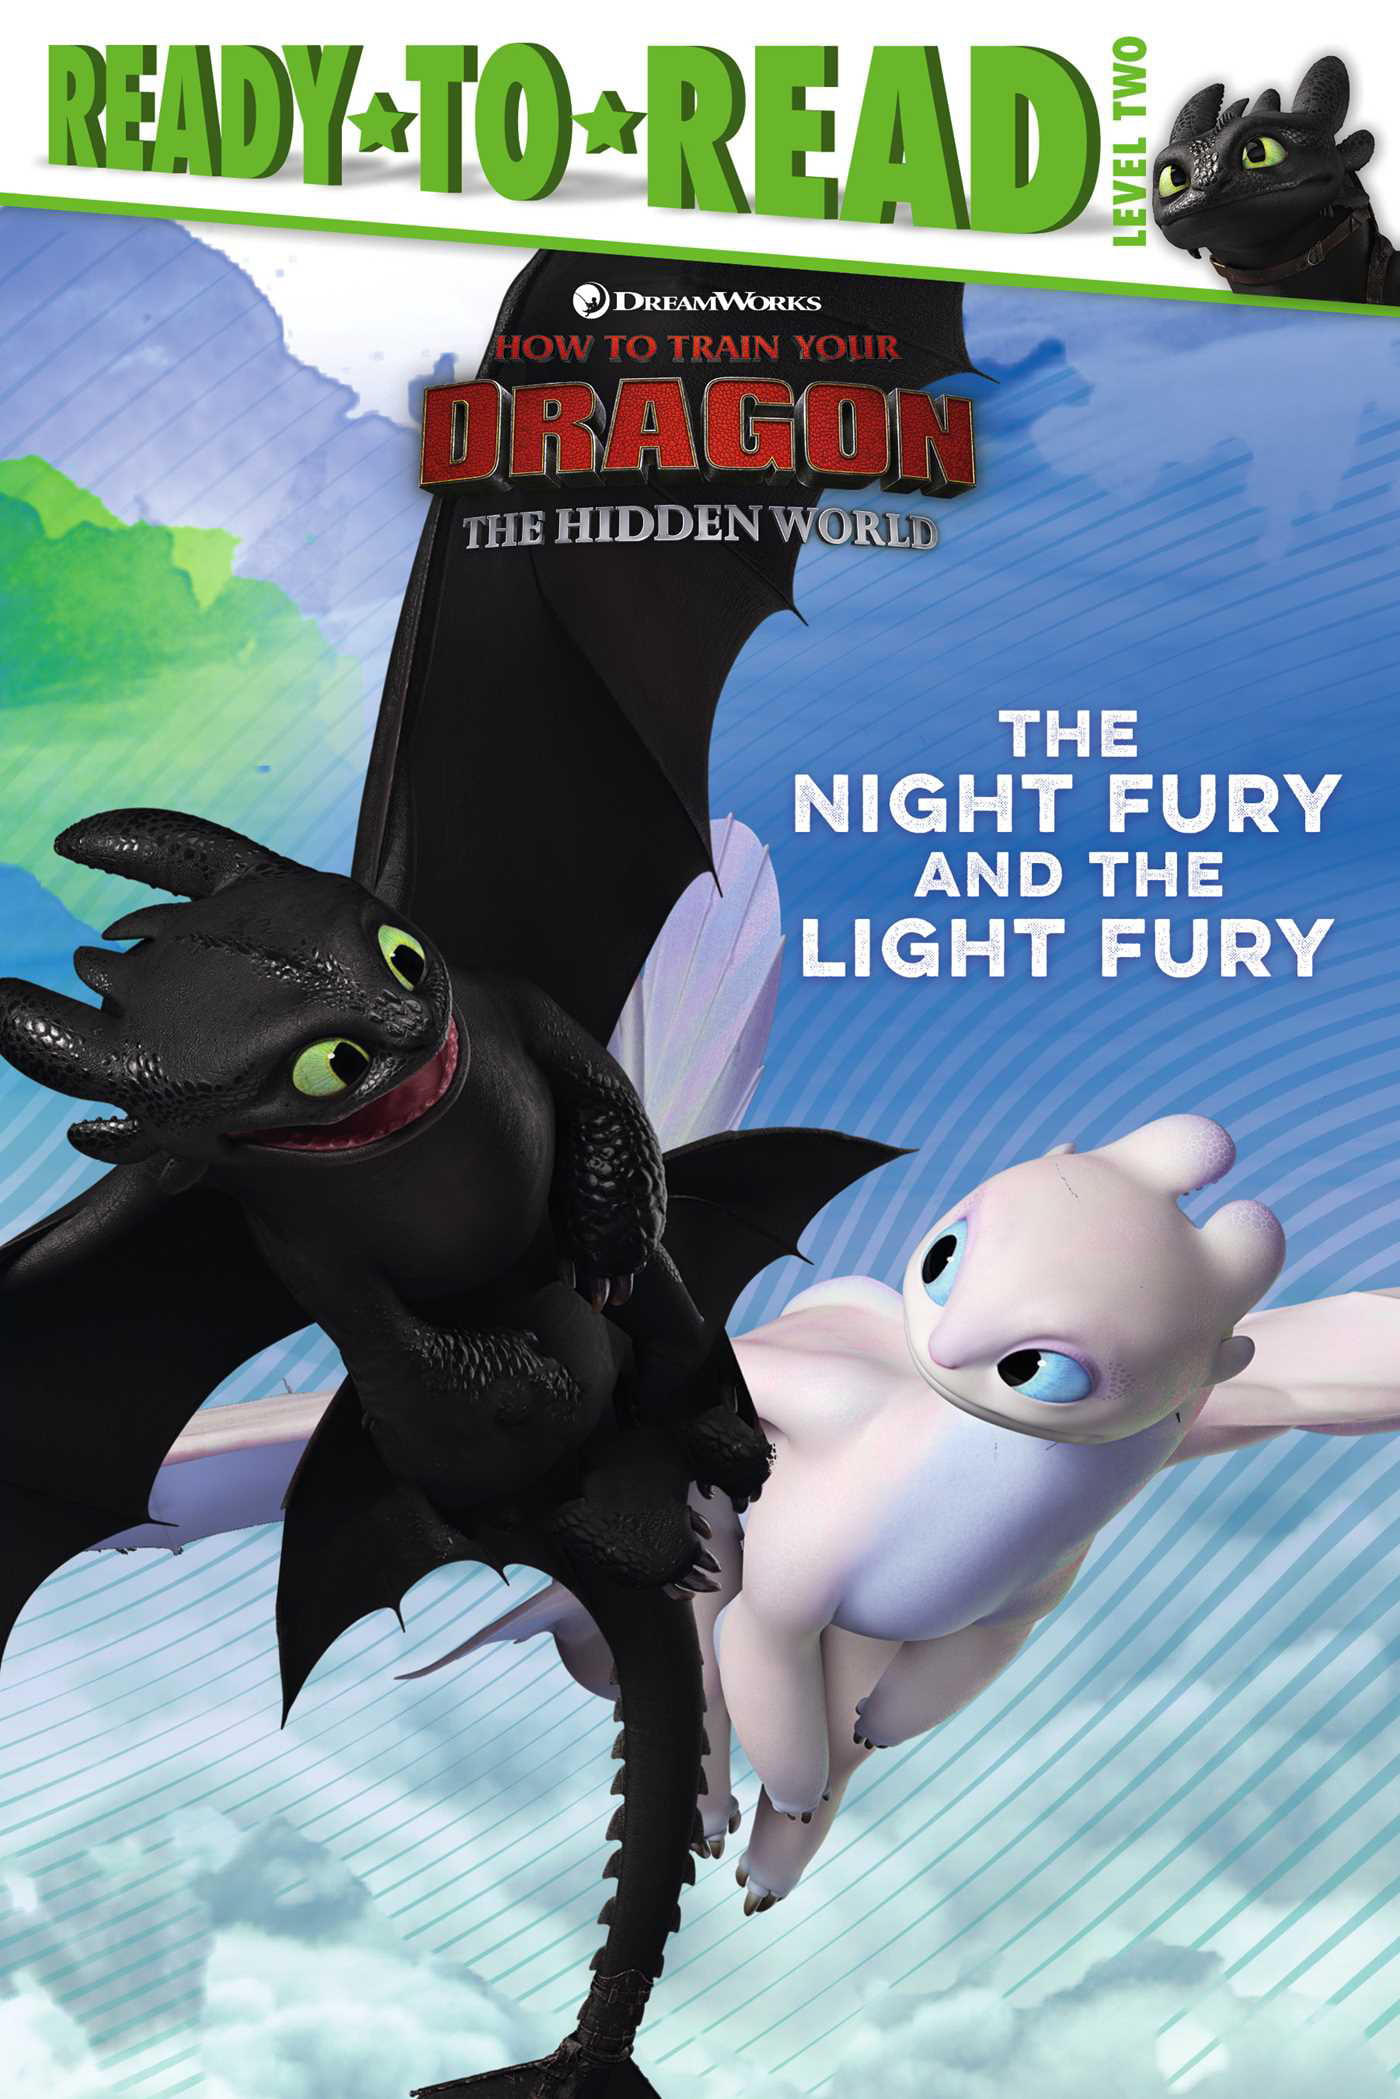 uvidenhed kone måtte How to Train Your Dragon: Hidden World: The Night Fury and the Light Fury :  Ready-To-Read Level 2 (Paperback) - Walmart.com